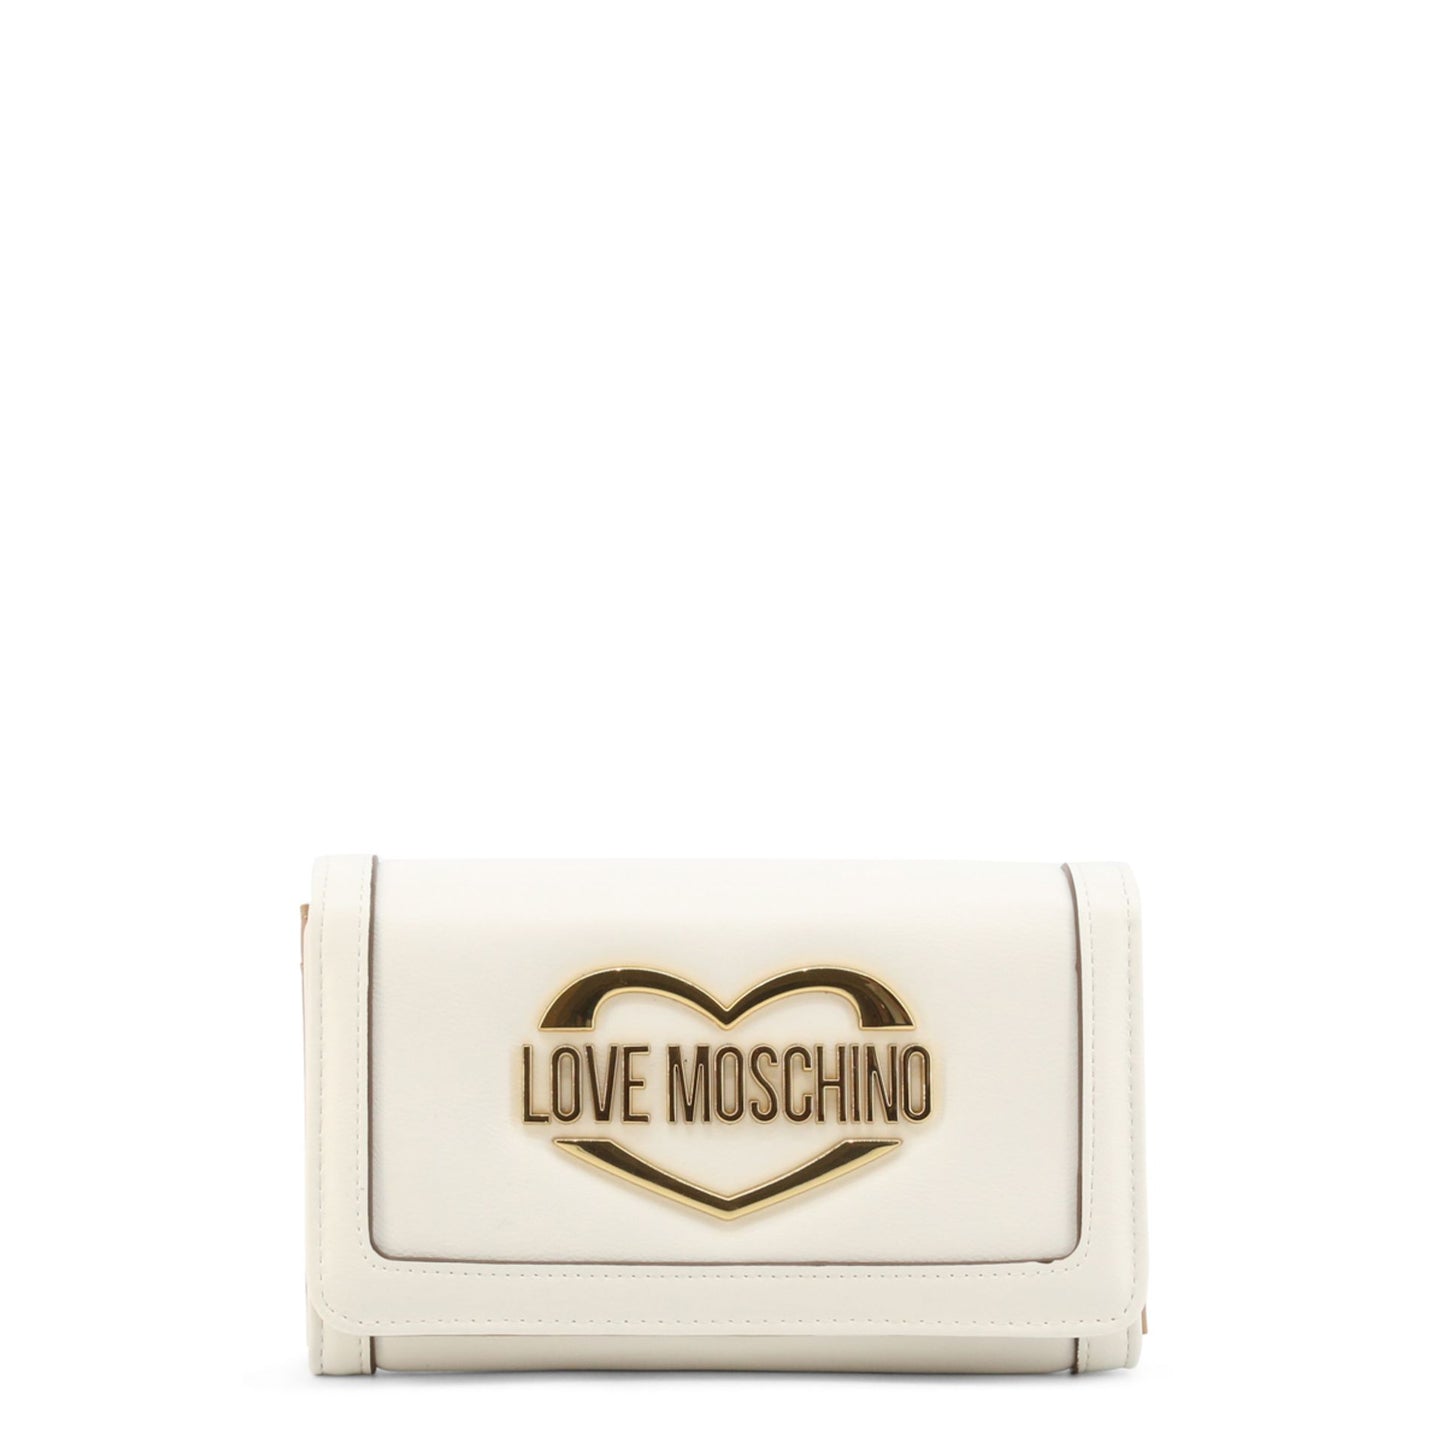 Love Moschino Wallets